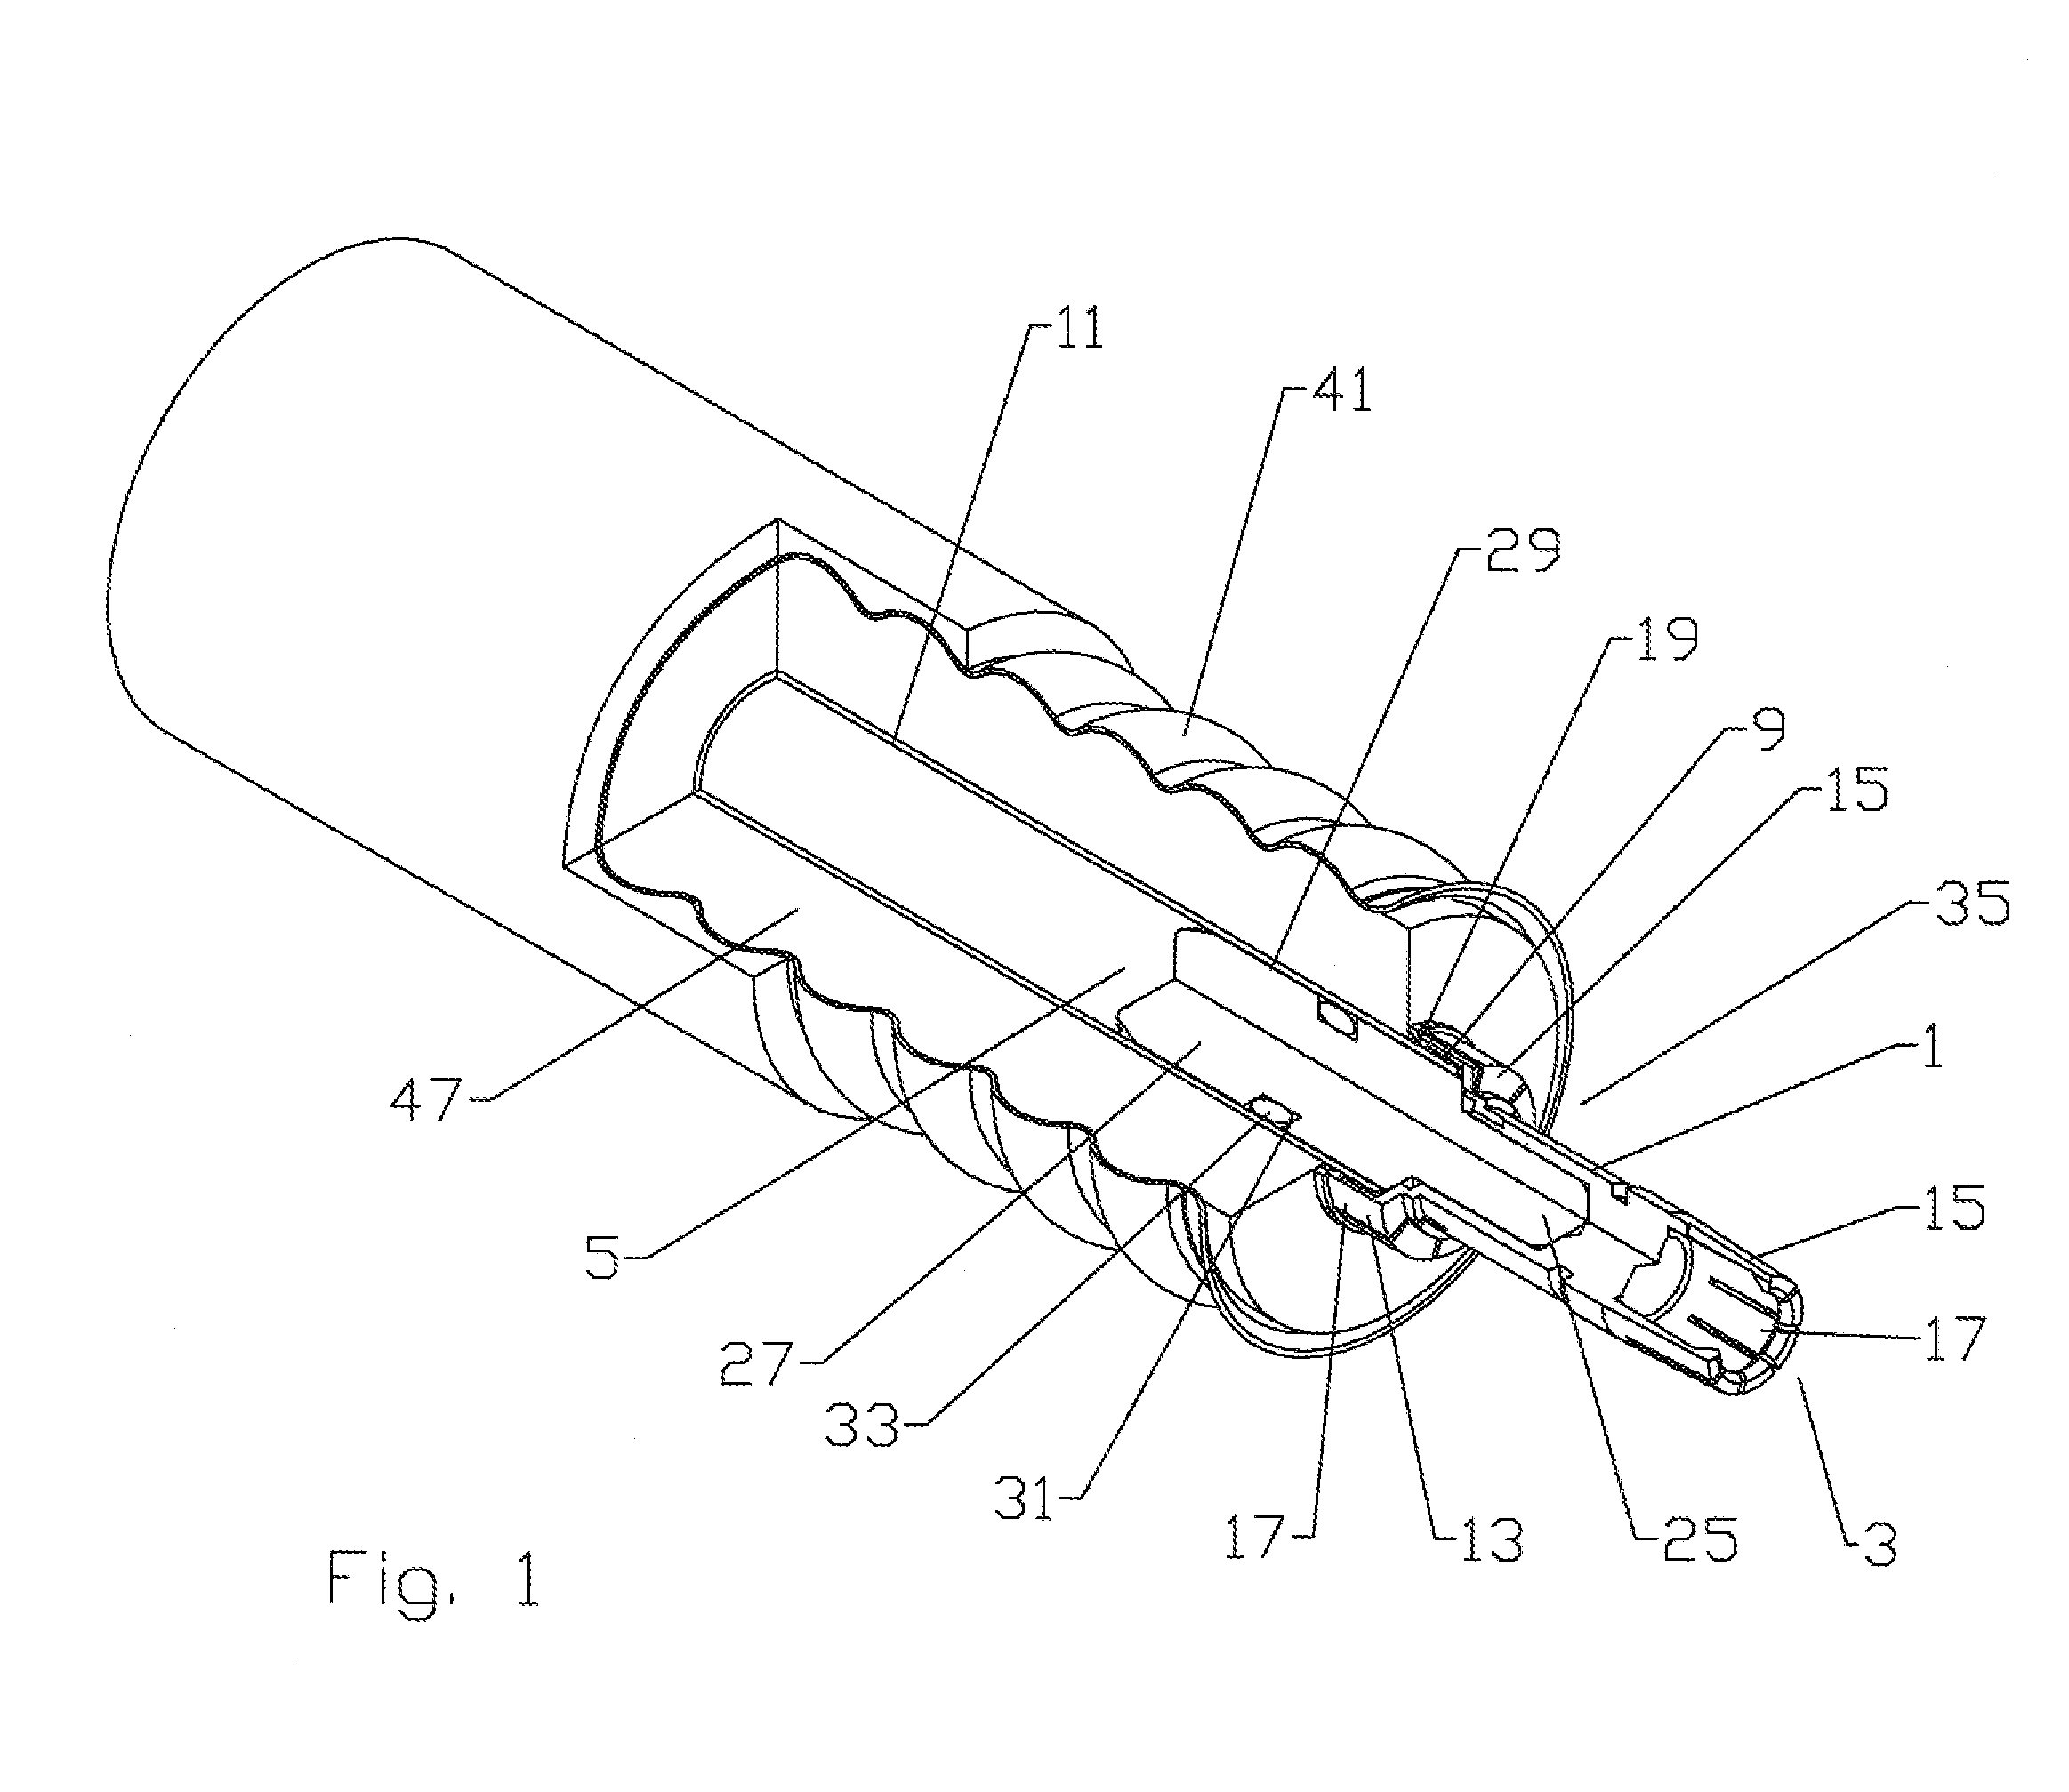 Hollow inner conductor contact for coaxial cable connector